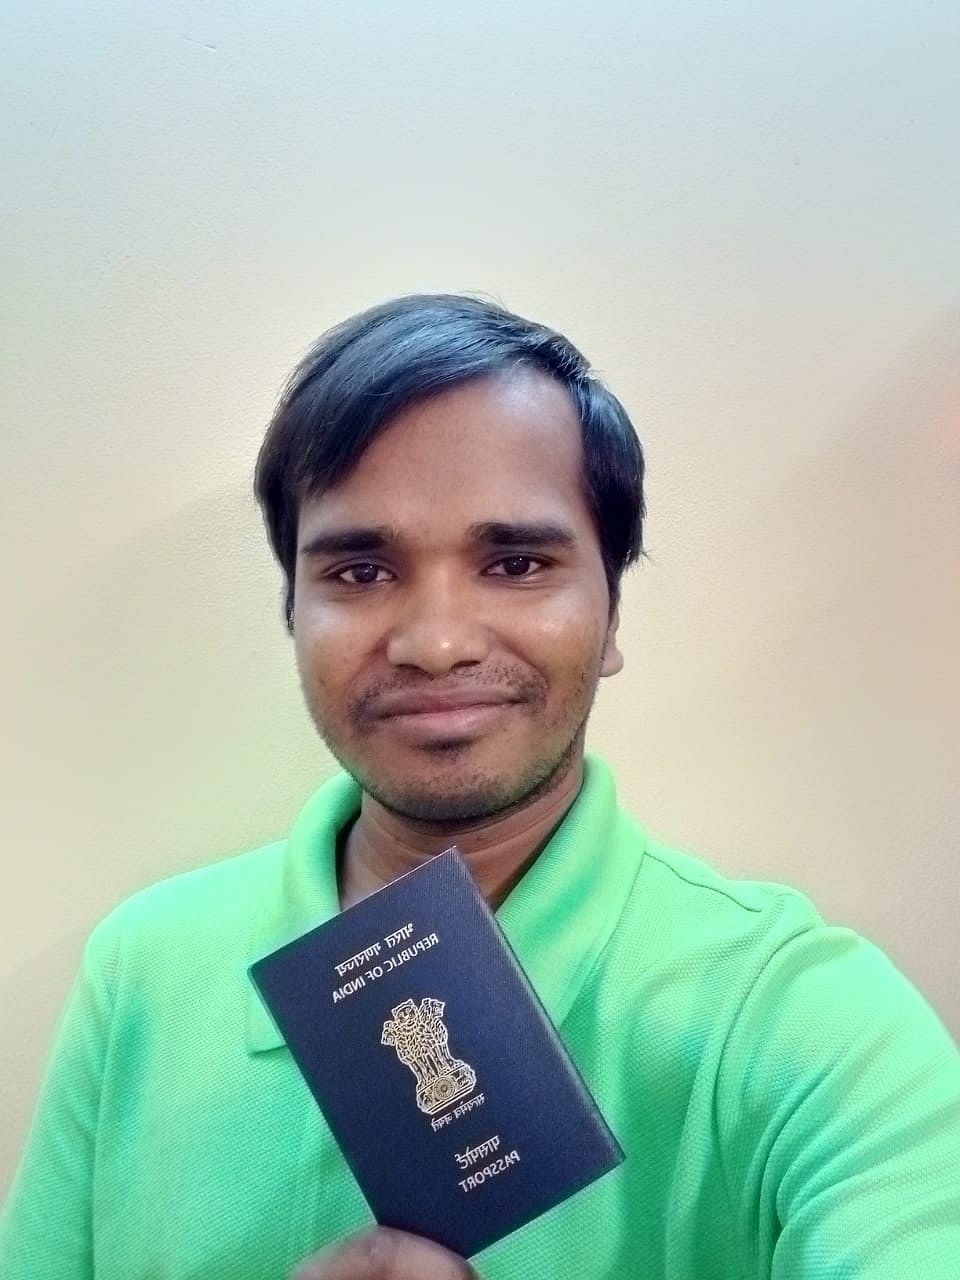 To get help with my passport issue, I shared my story with The Quint’s My Report team in December 2021.